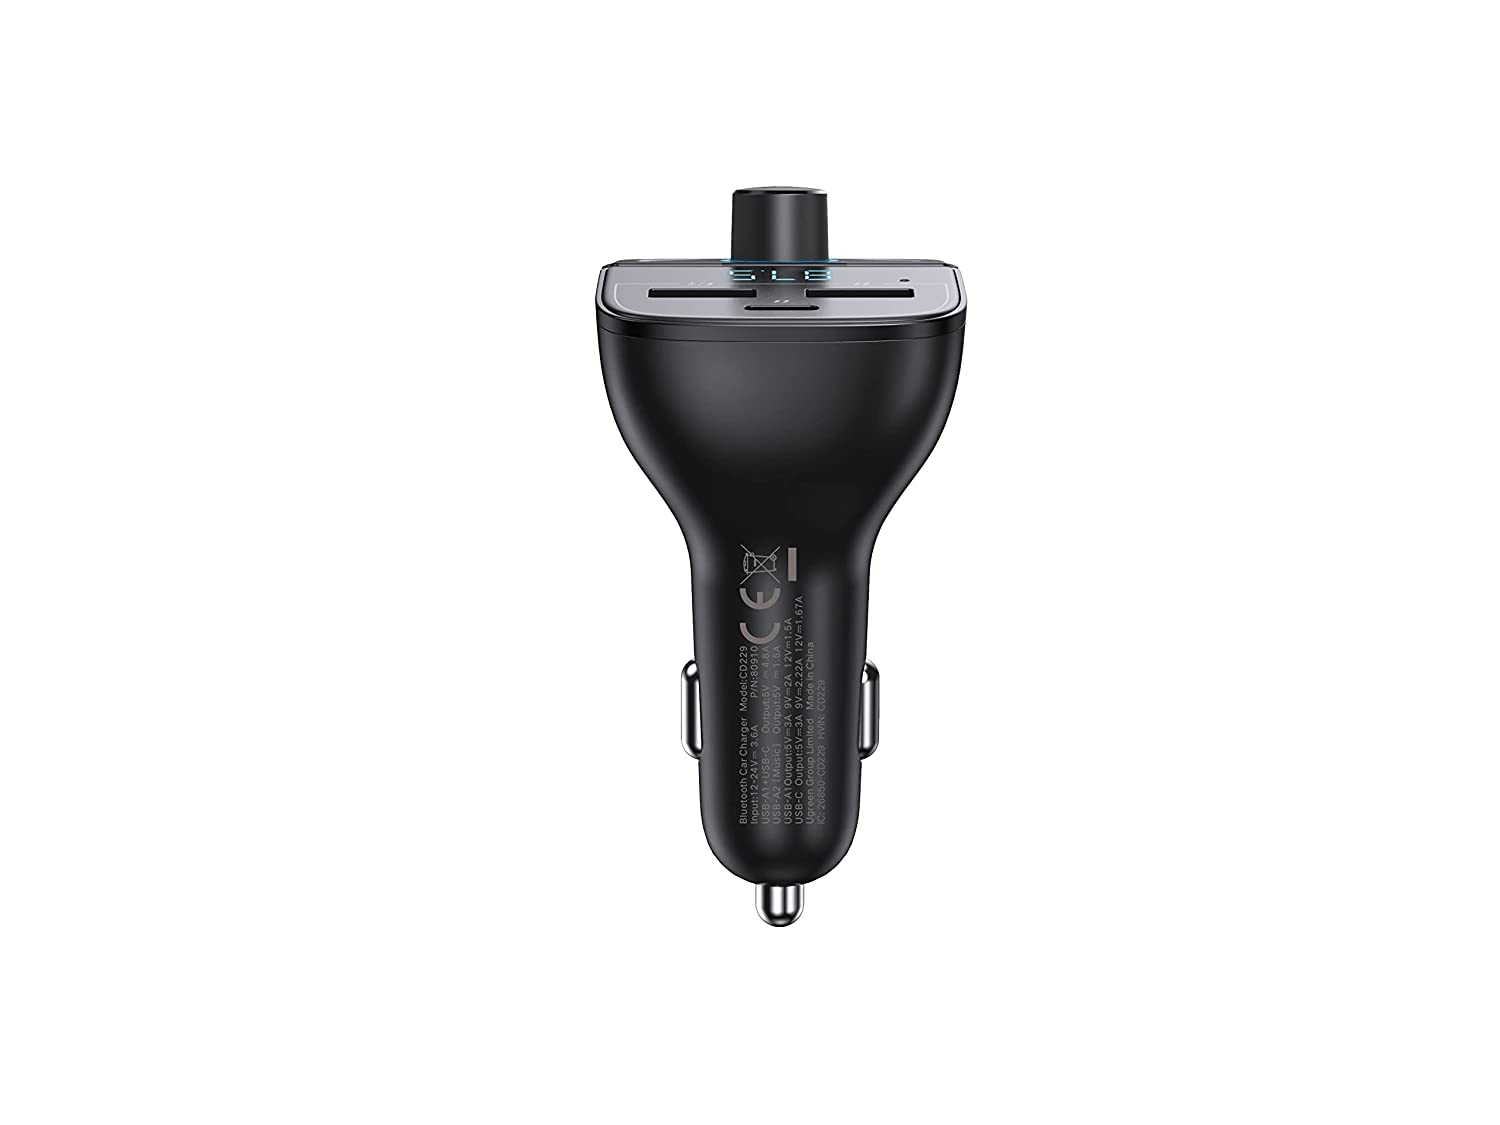 UGREEN Car Charger 42.5W Fast Charging PD 20W - Black